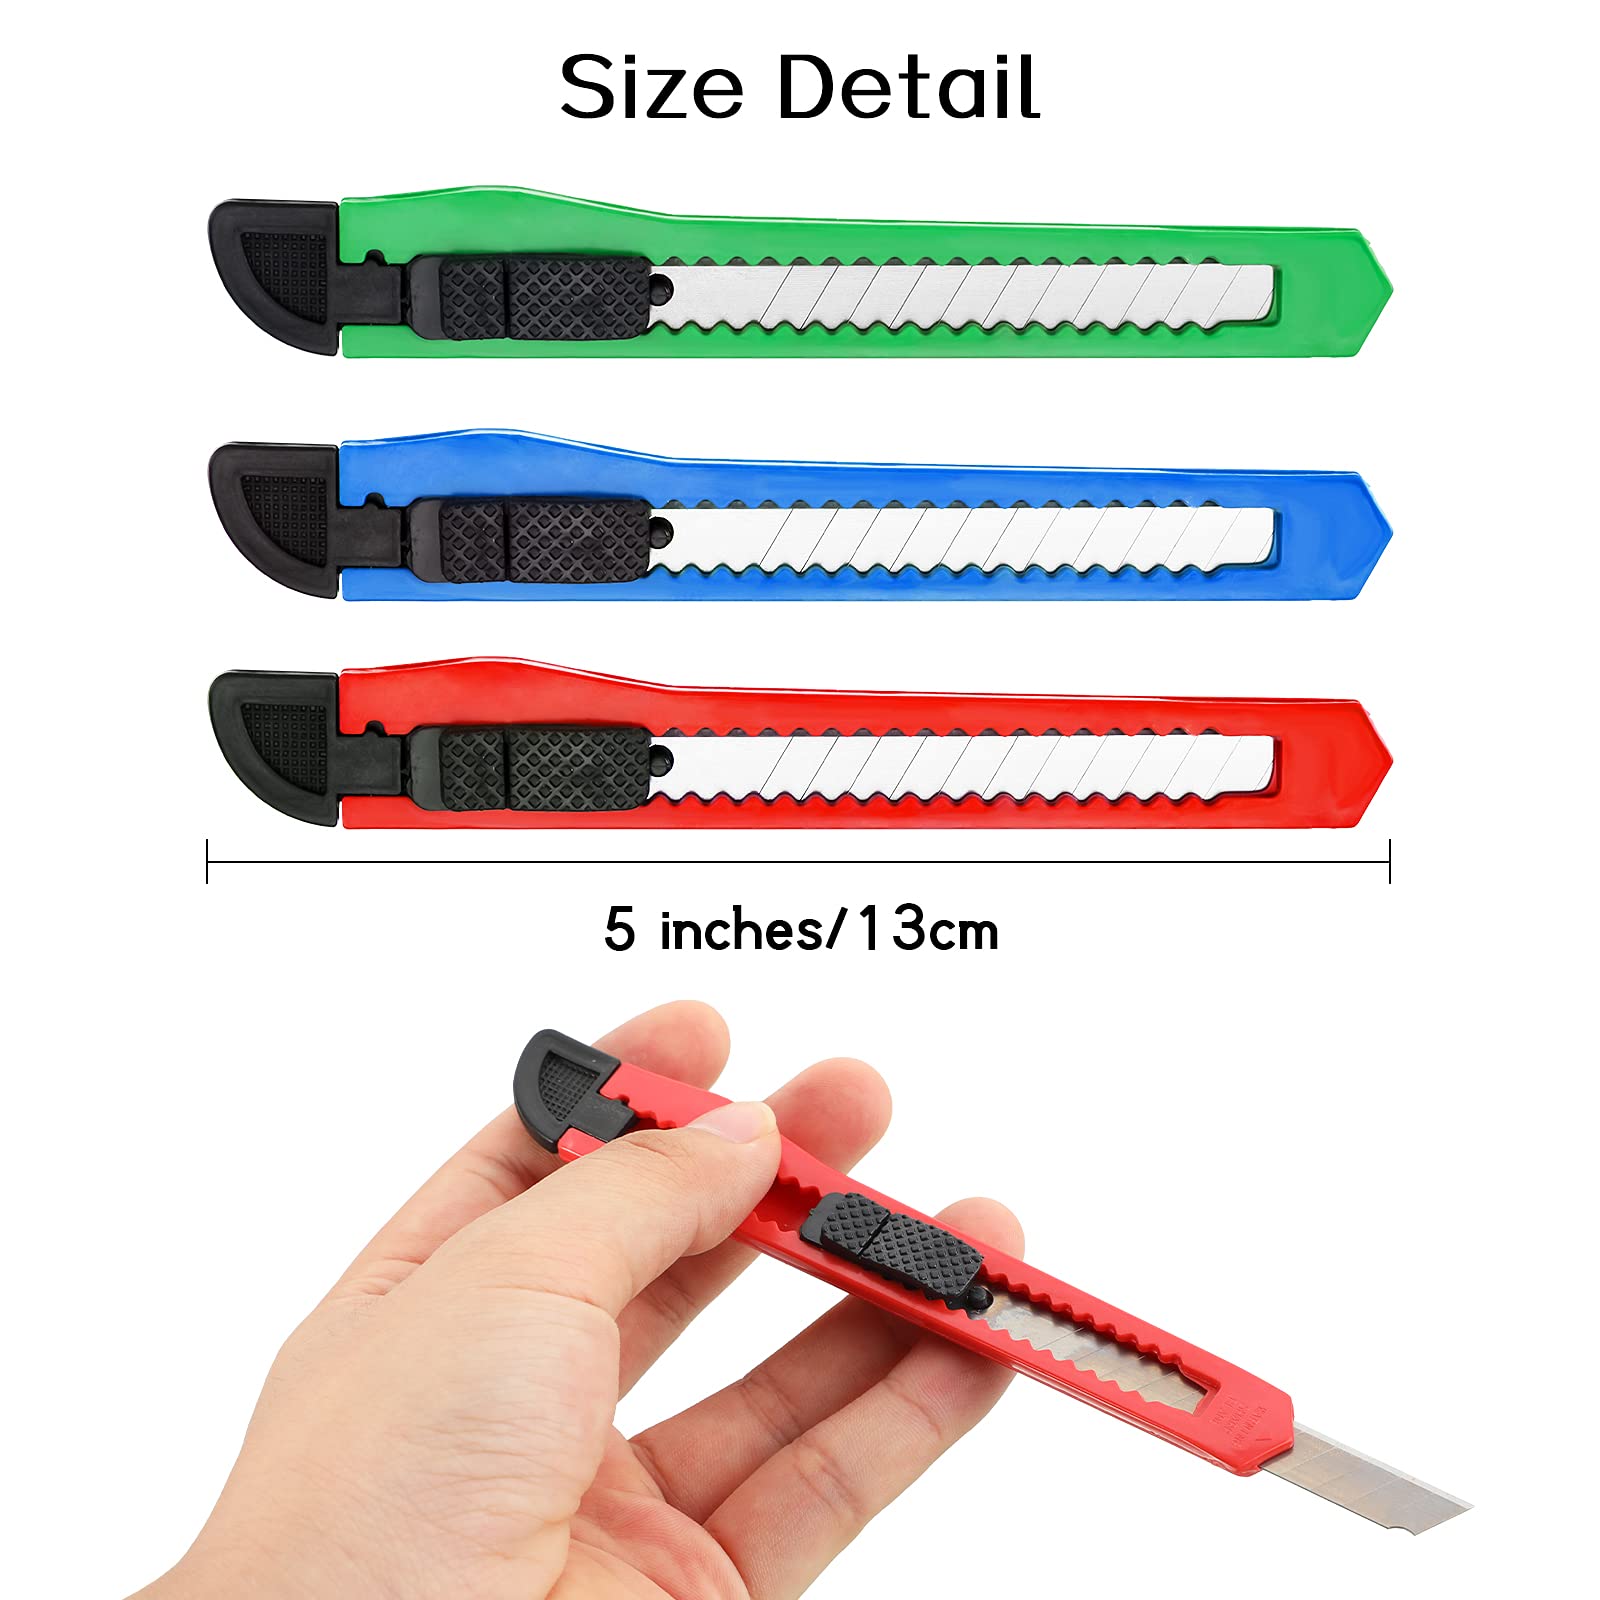 Honoson Box Cutters Bulk 9mm Utility Knife Retractable Blades Knifes Small Plastic Compact 3 Colors with Sliding Lock Tools for Heavy Duty Office Home Arts Crafts Hobby(30 Pieces)